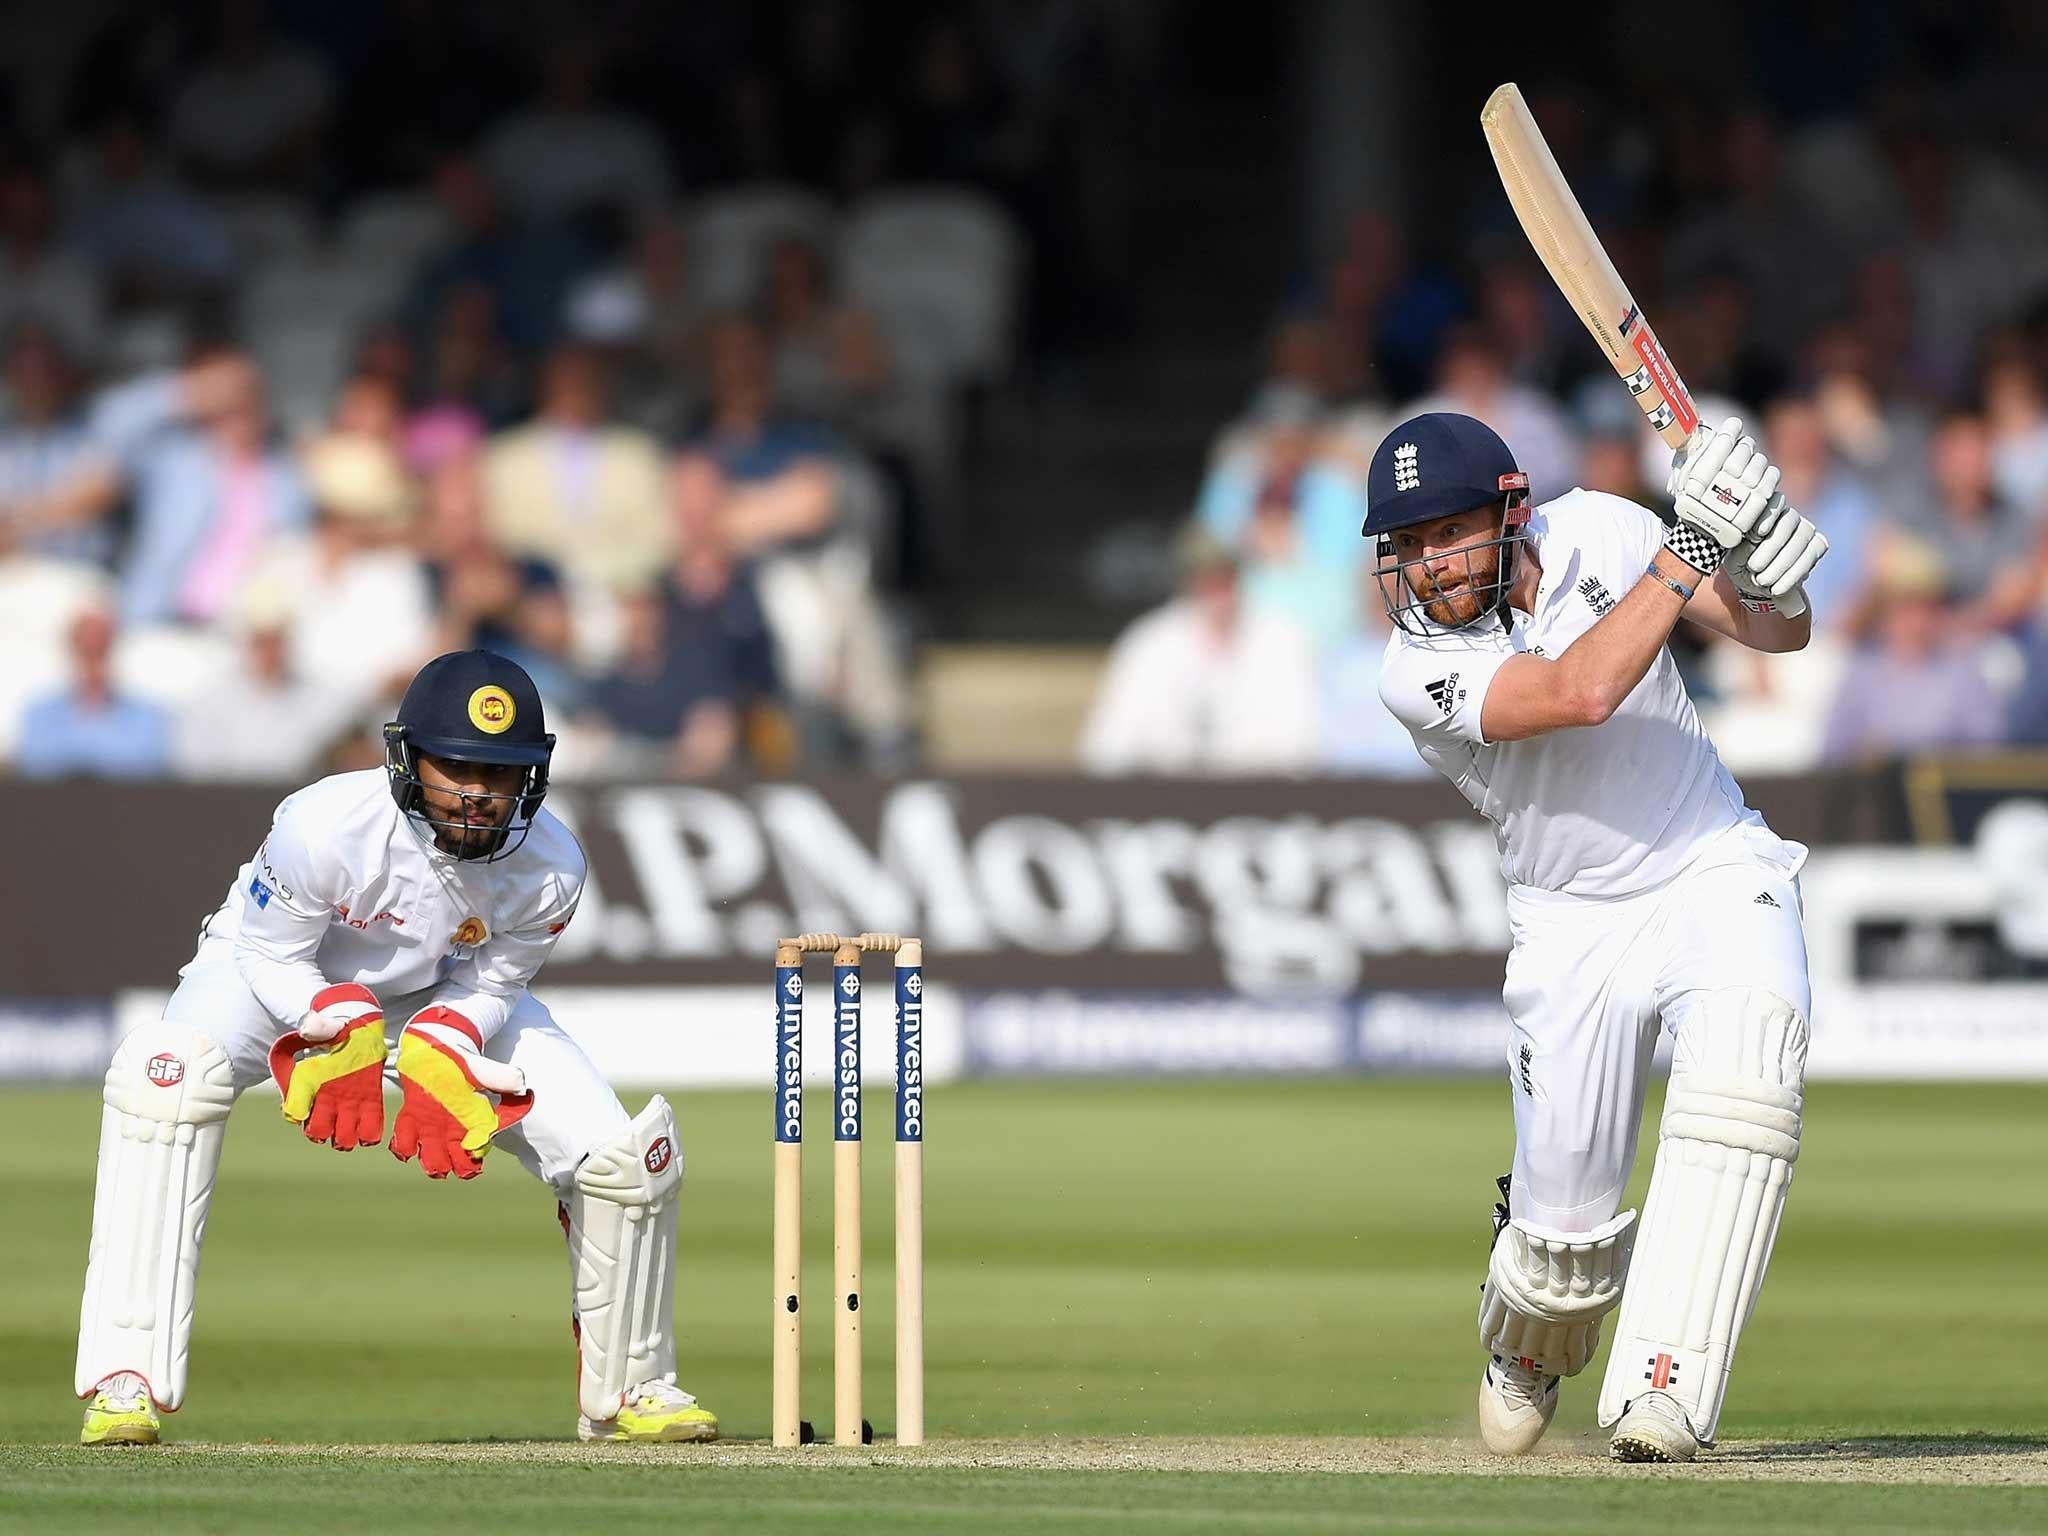 Jonny Bairstow opens the shoulders on the way to his hundred at Lord's